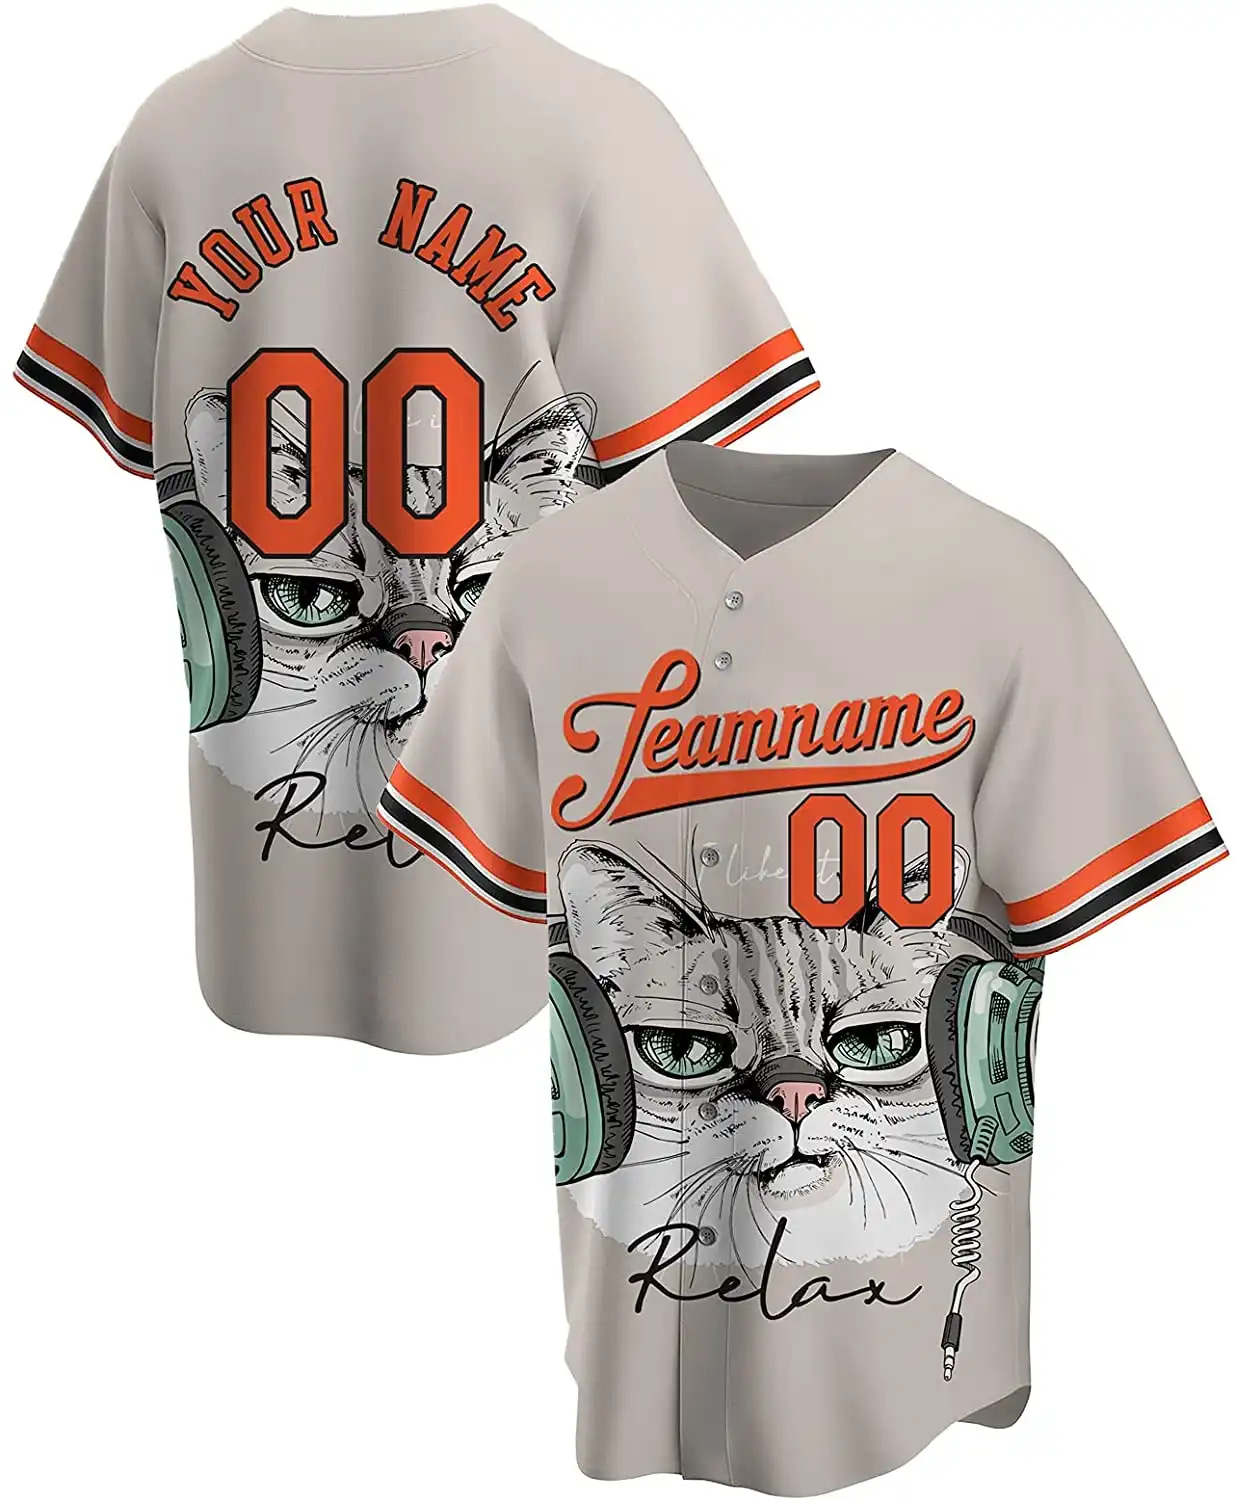 Personalized Cute Cat Face Printed Name And Number Idea Gift For Fans Baseball Jersey